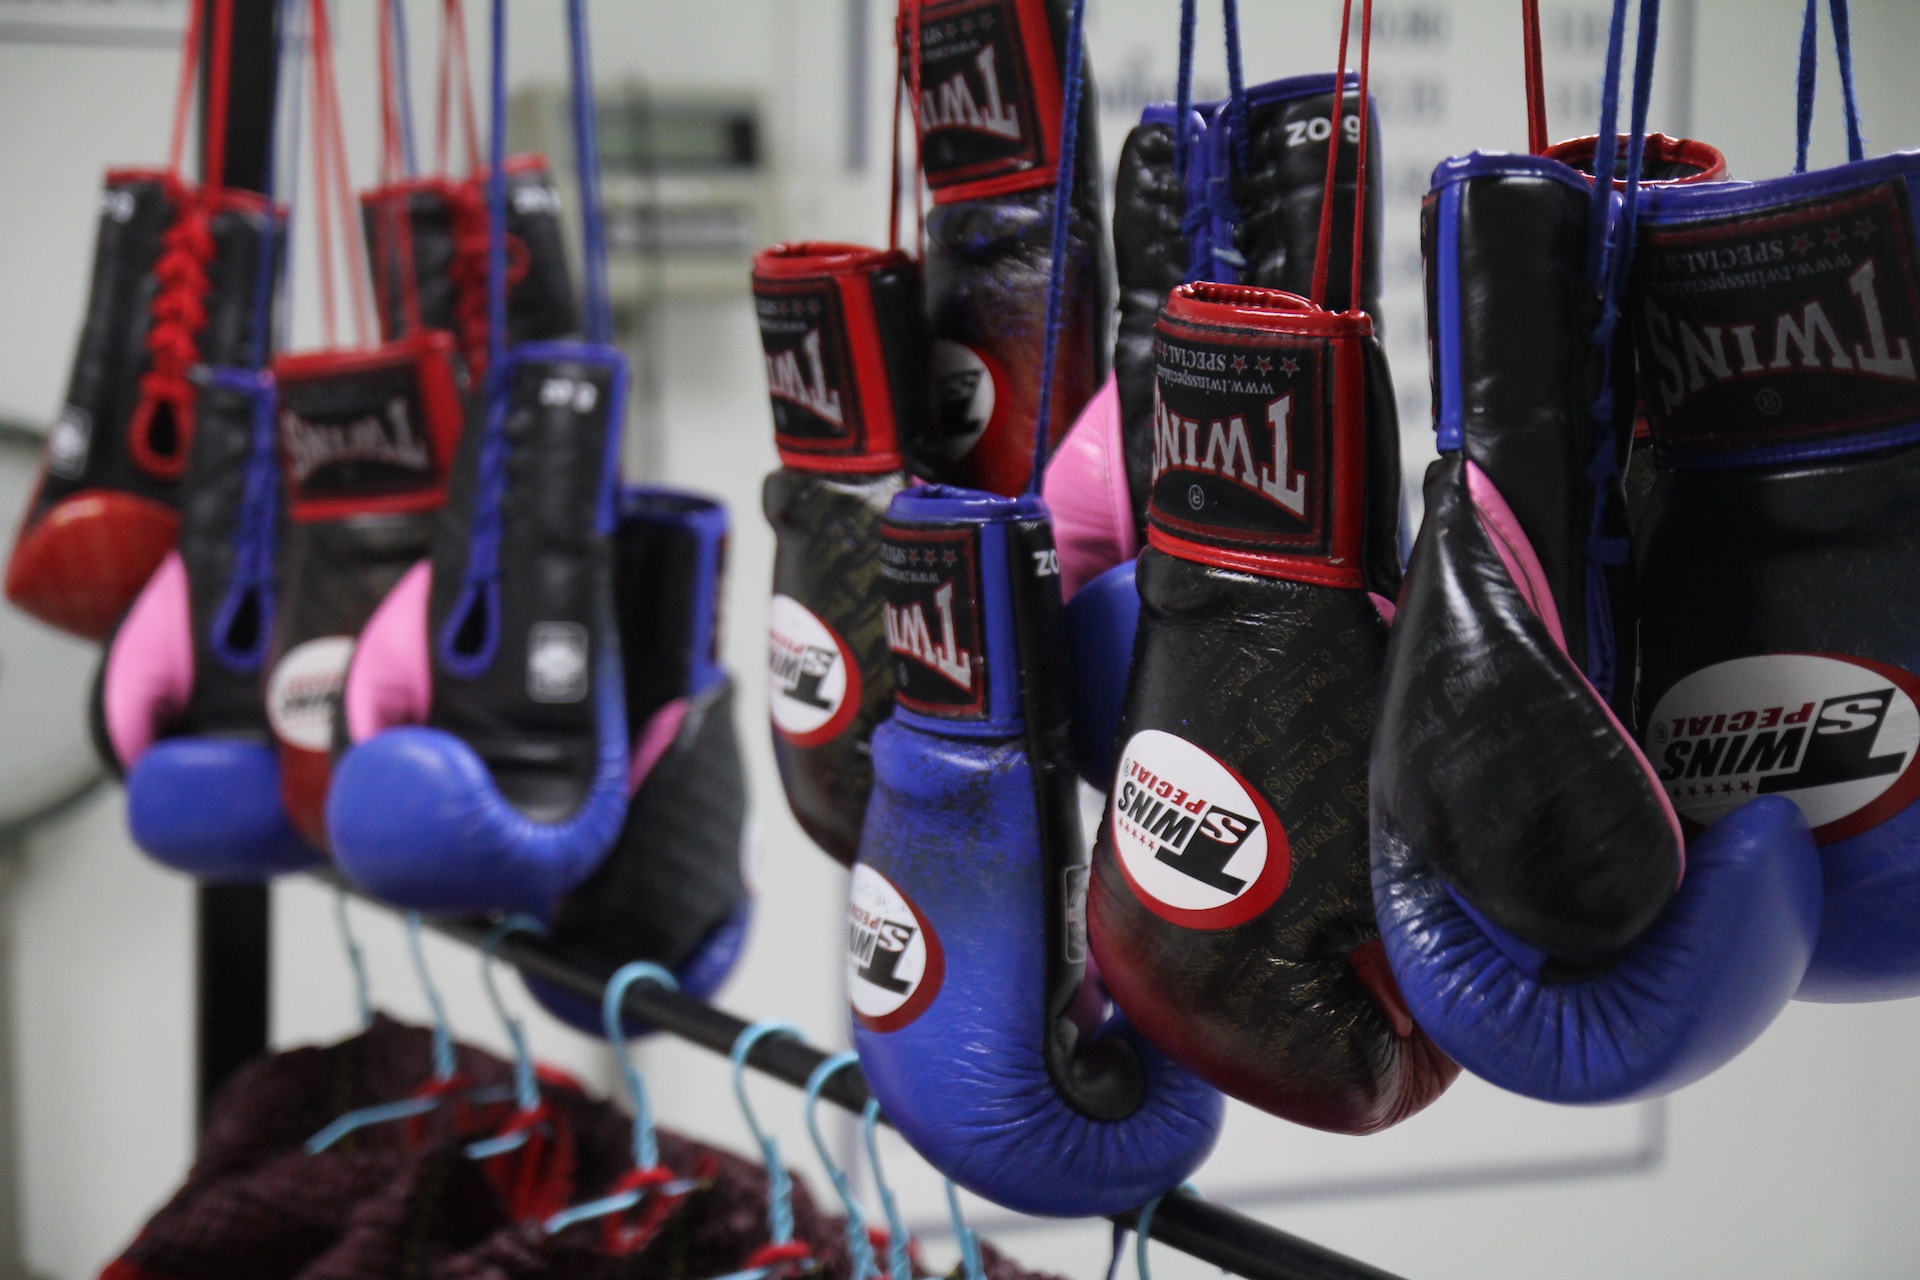 Boxing gloves hanging up for Muay Thai